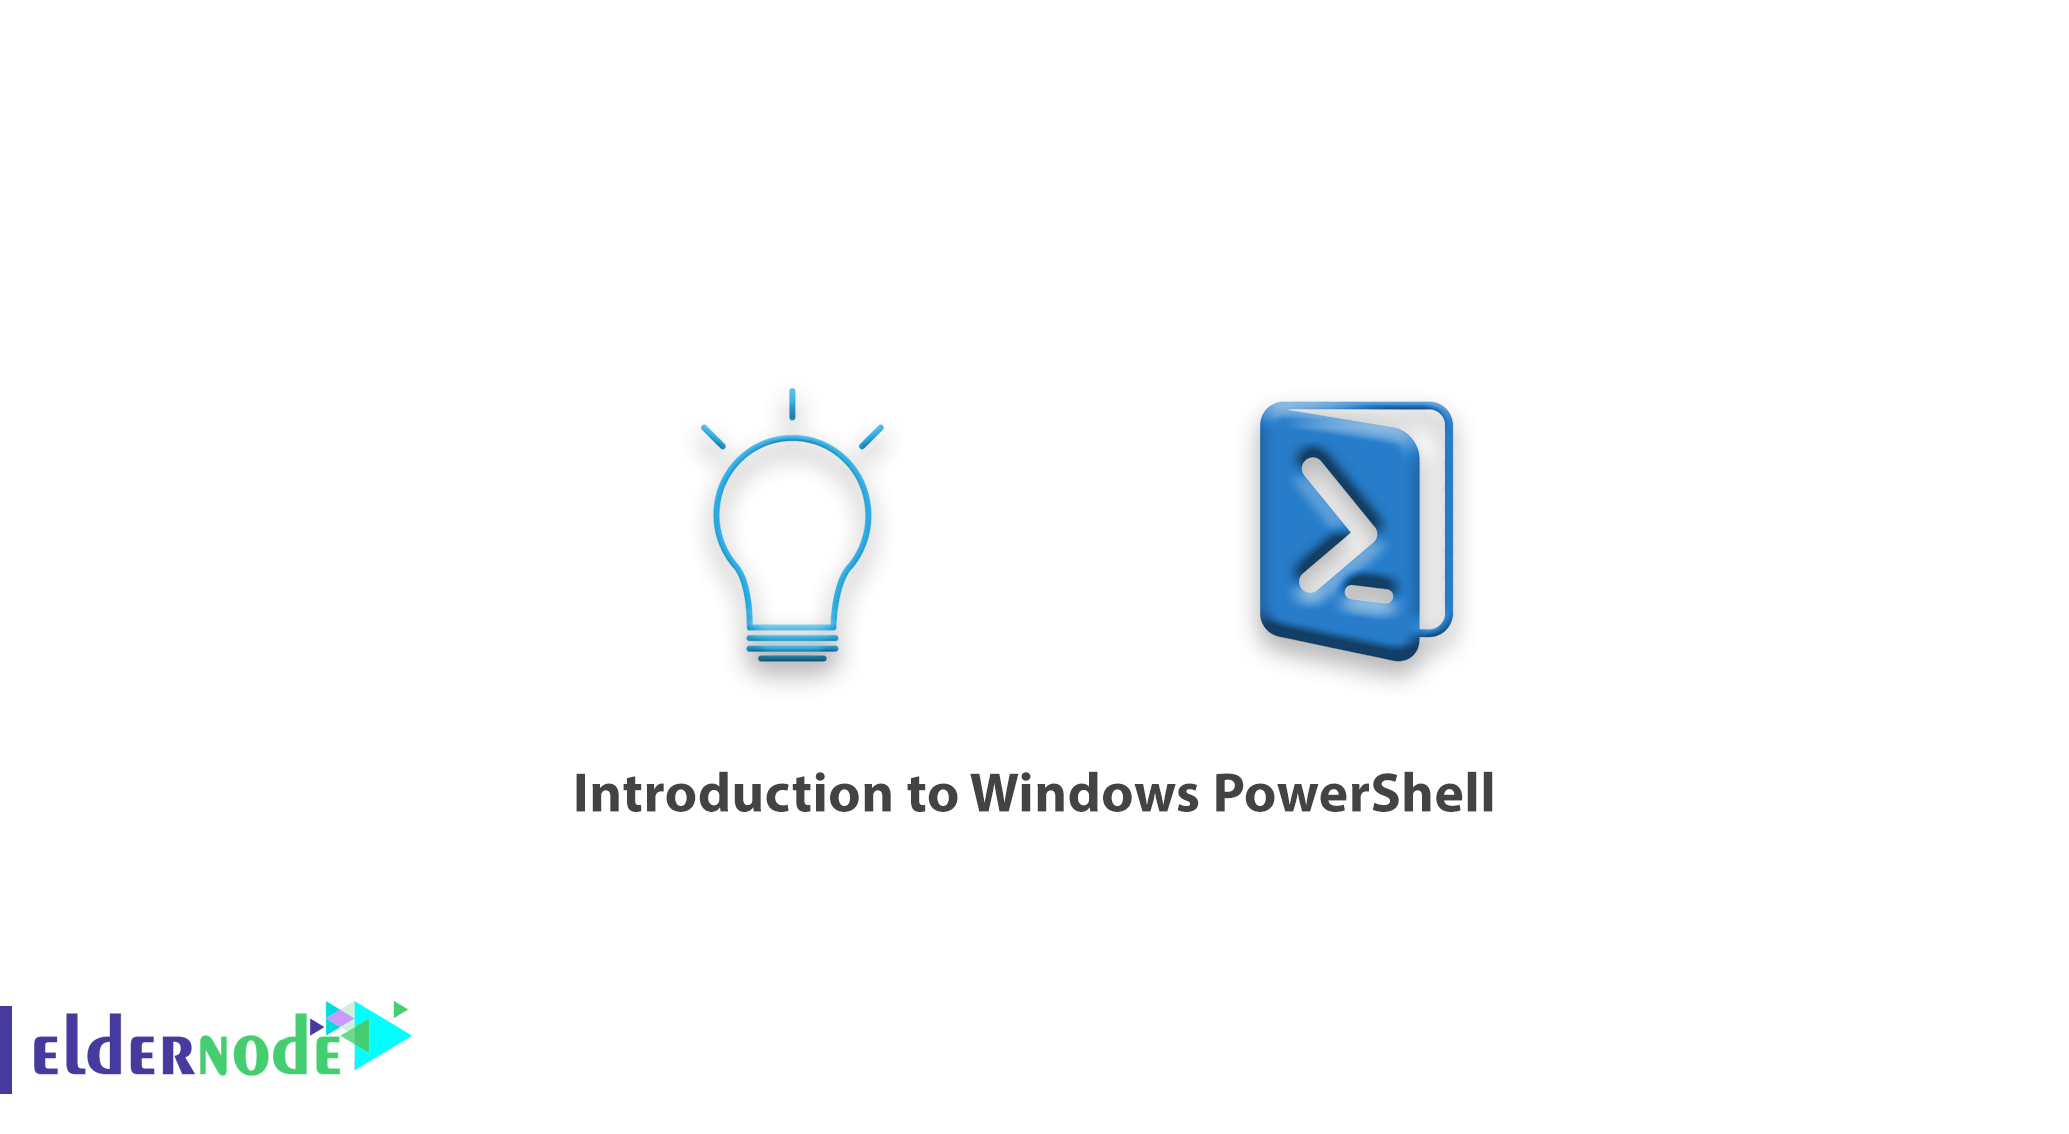 Introduction to Windows PowerShell